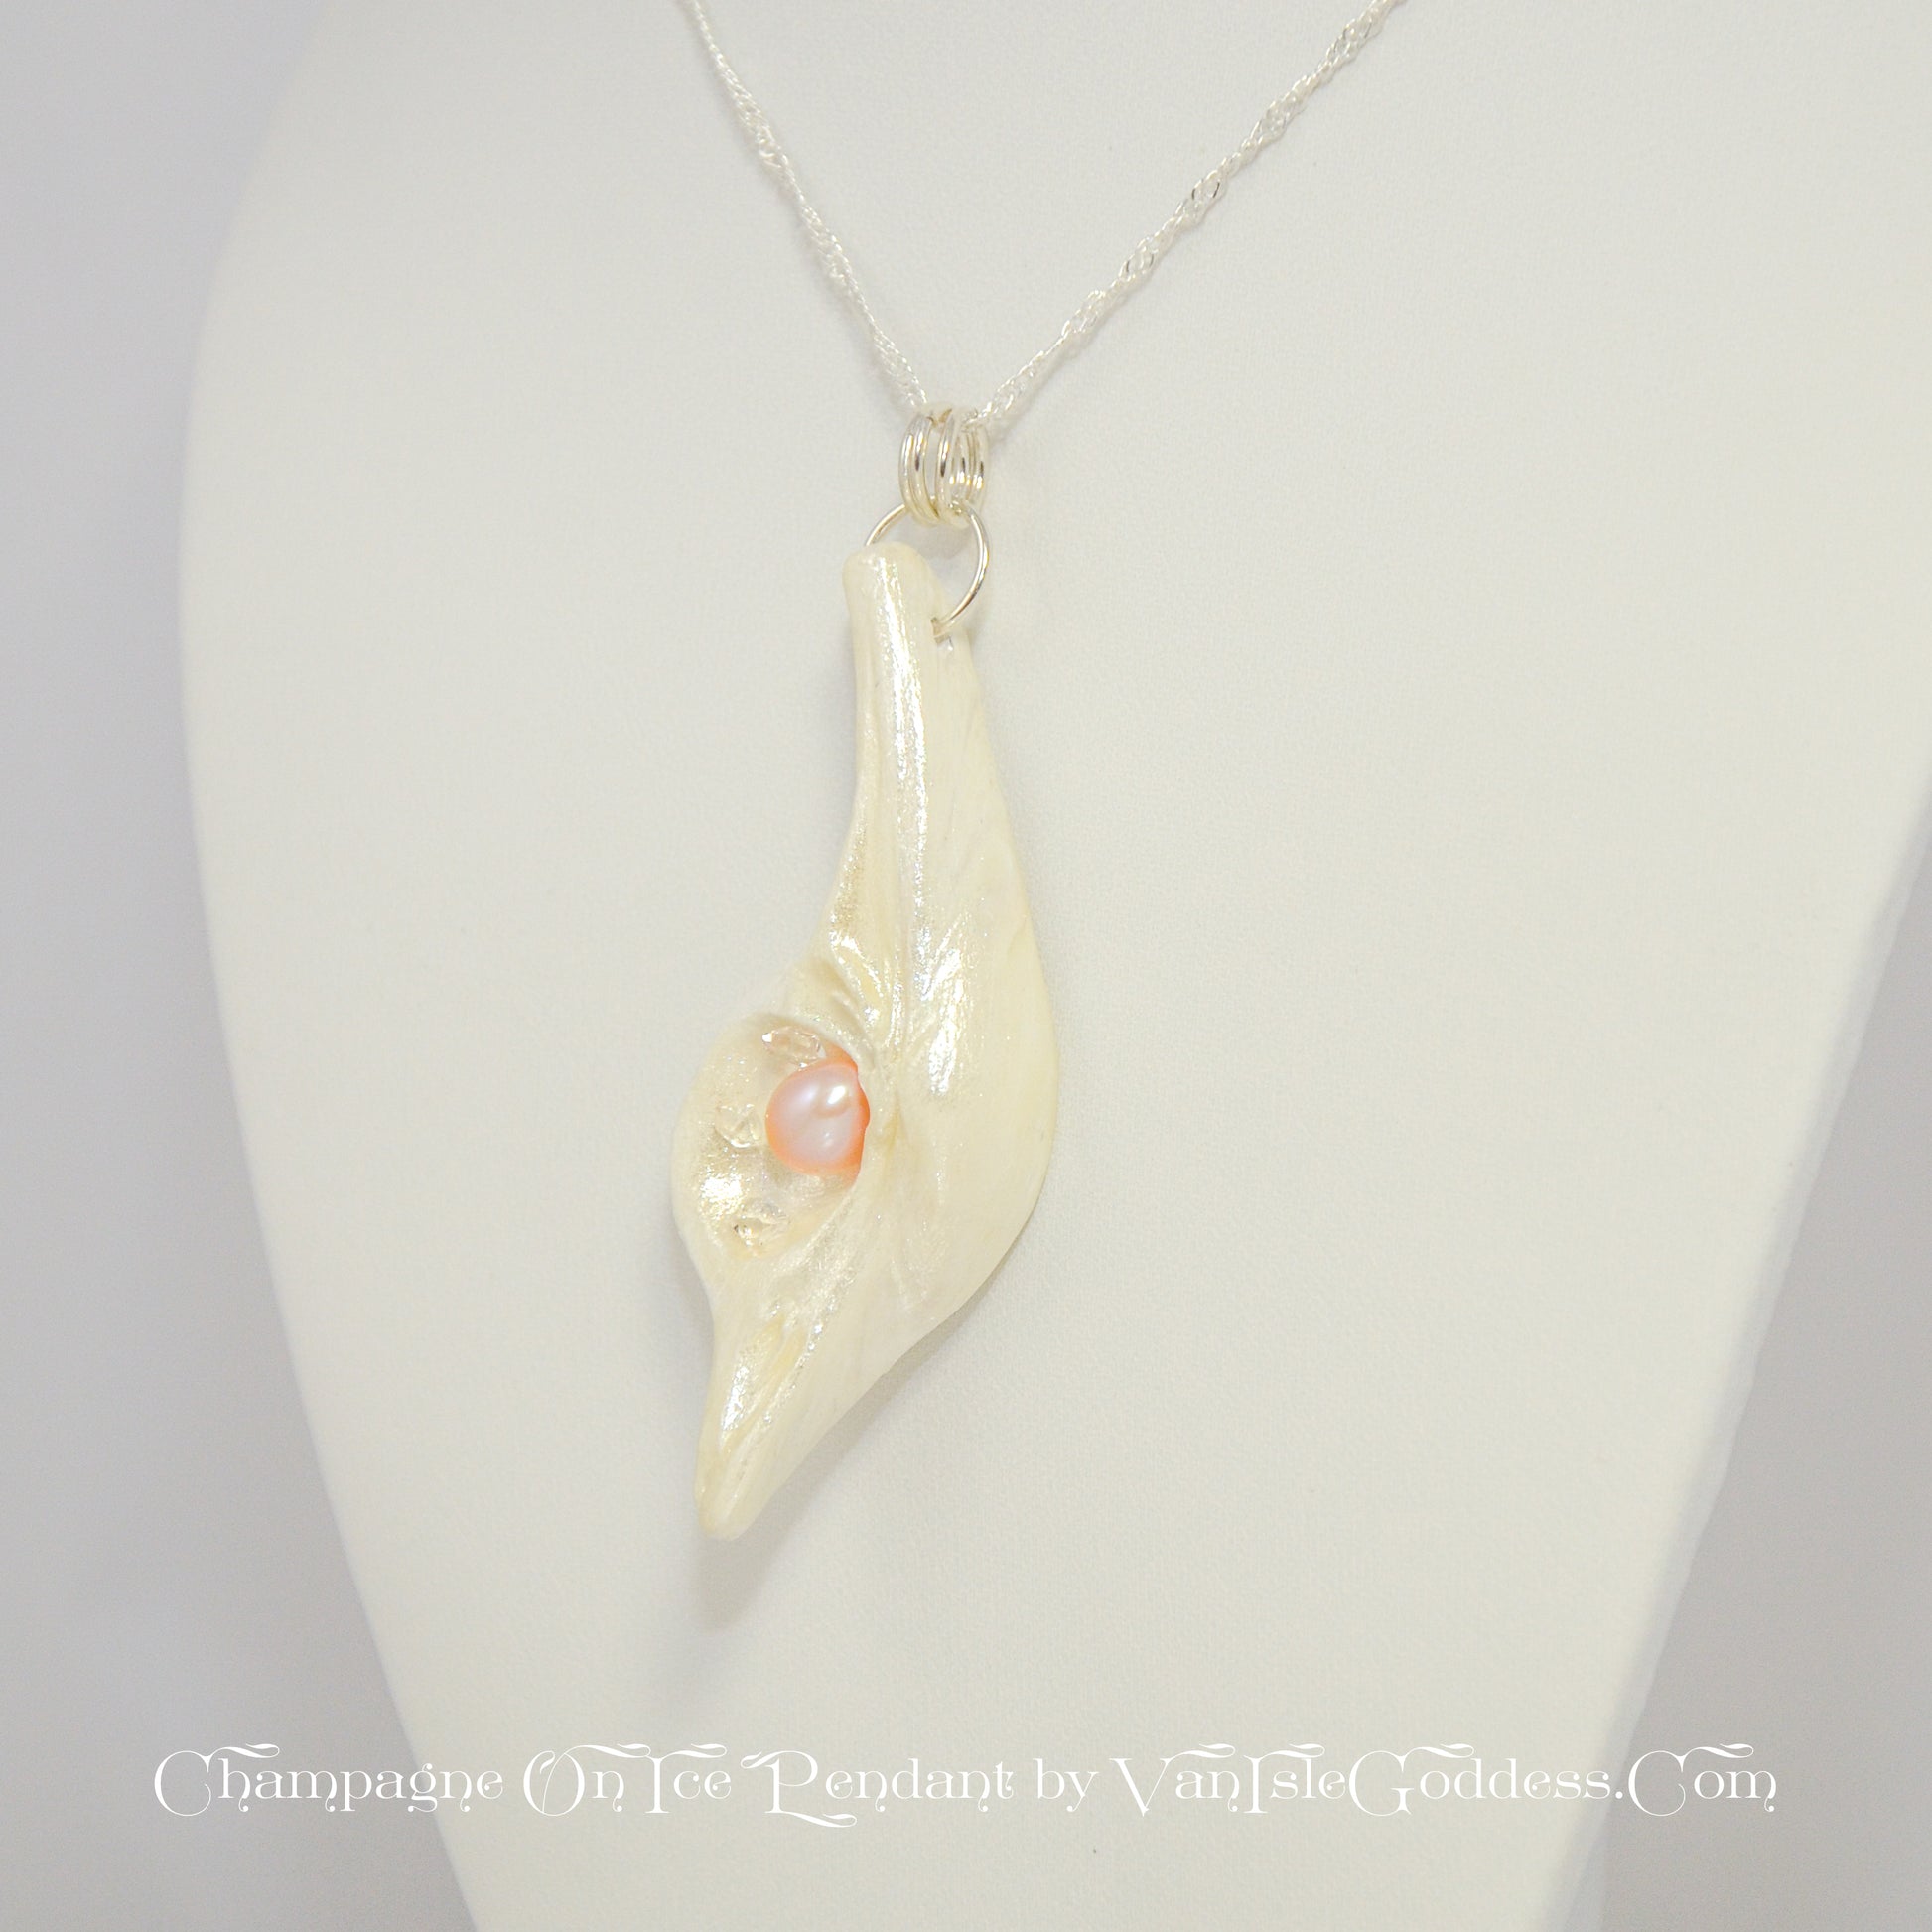 The Champagne on Ice pendant is shown hanging from a necklace.  The pendant is slightly turned to show the left side of the pendant. The print on the bottom of the image says: champagne on ice pendant by van isle goddess dot com